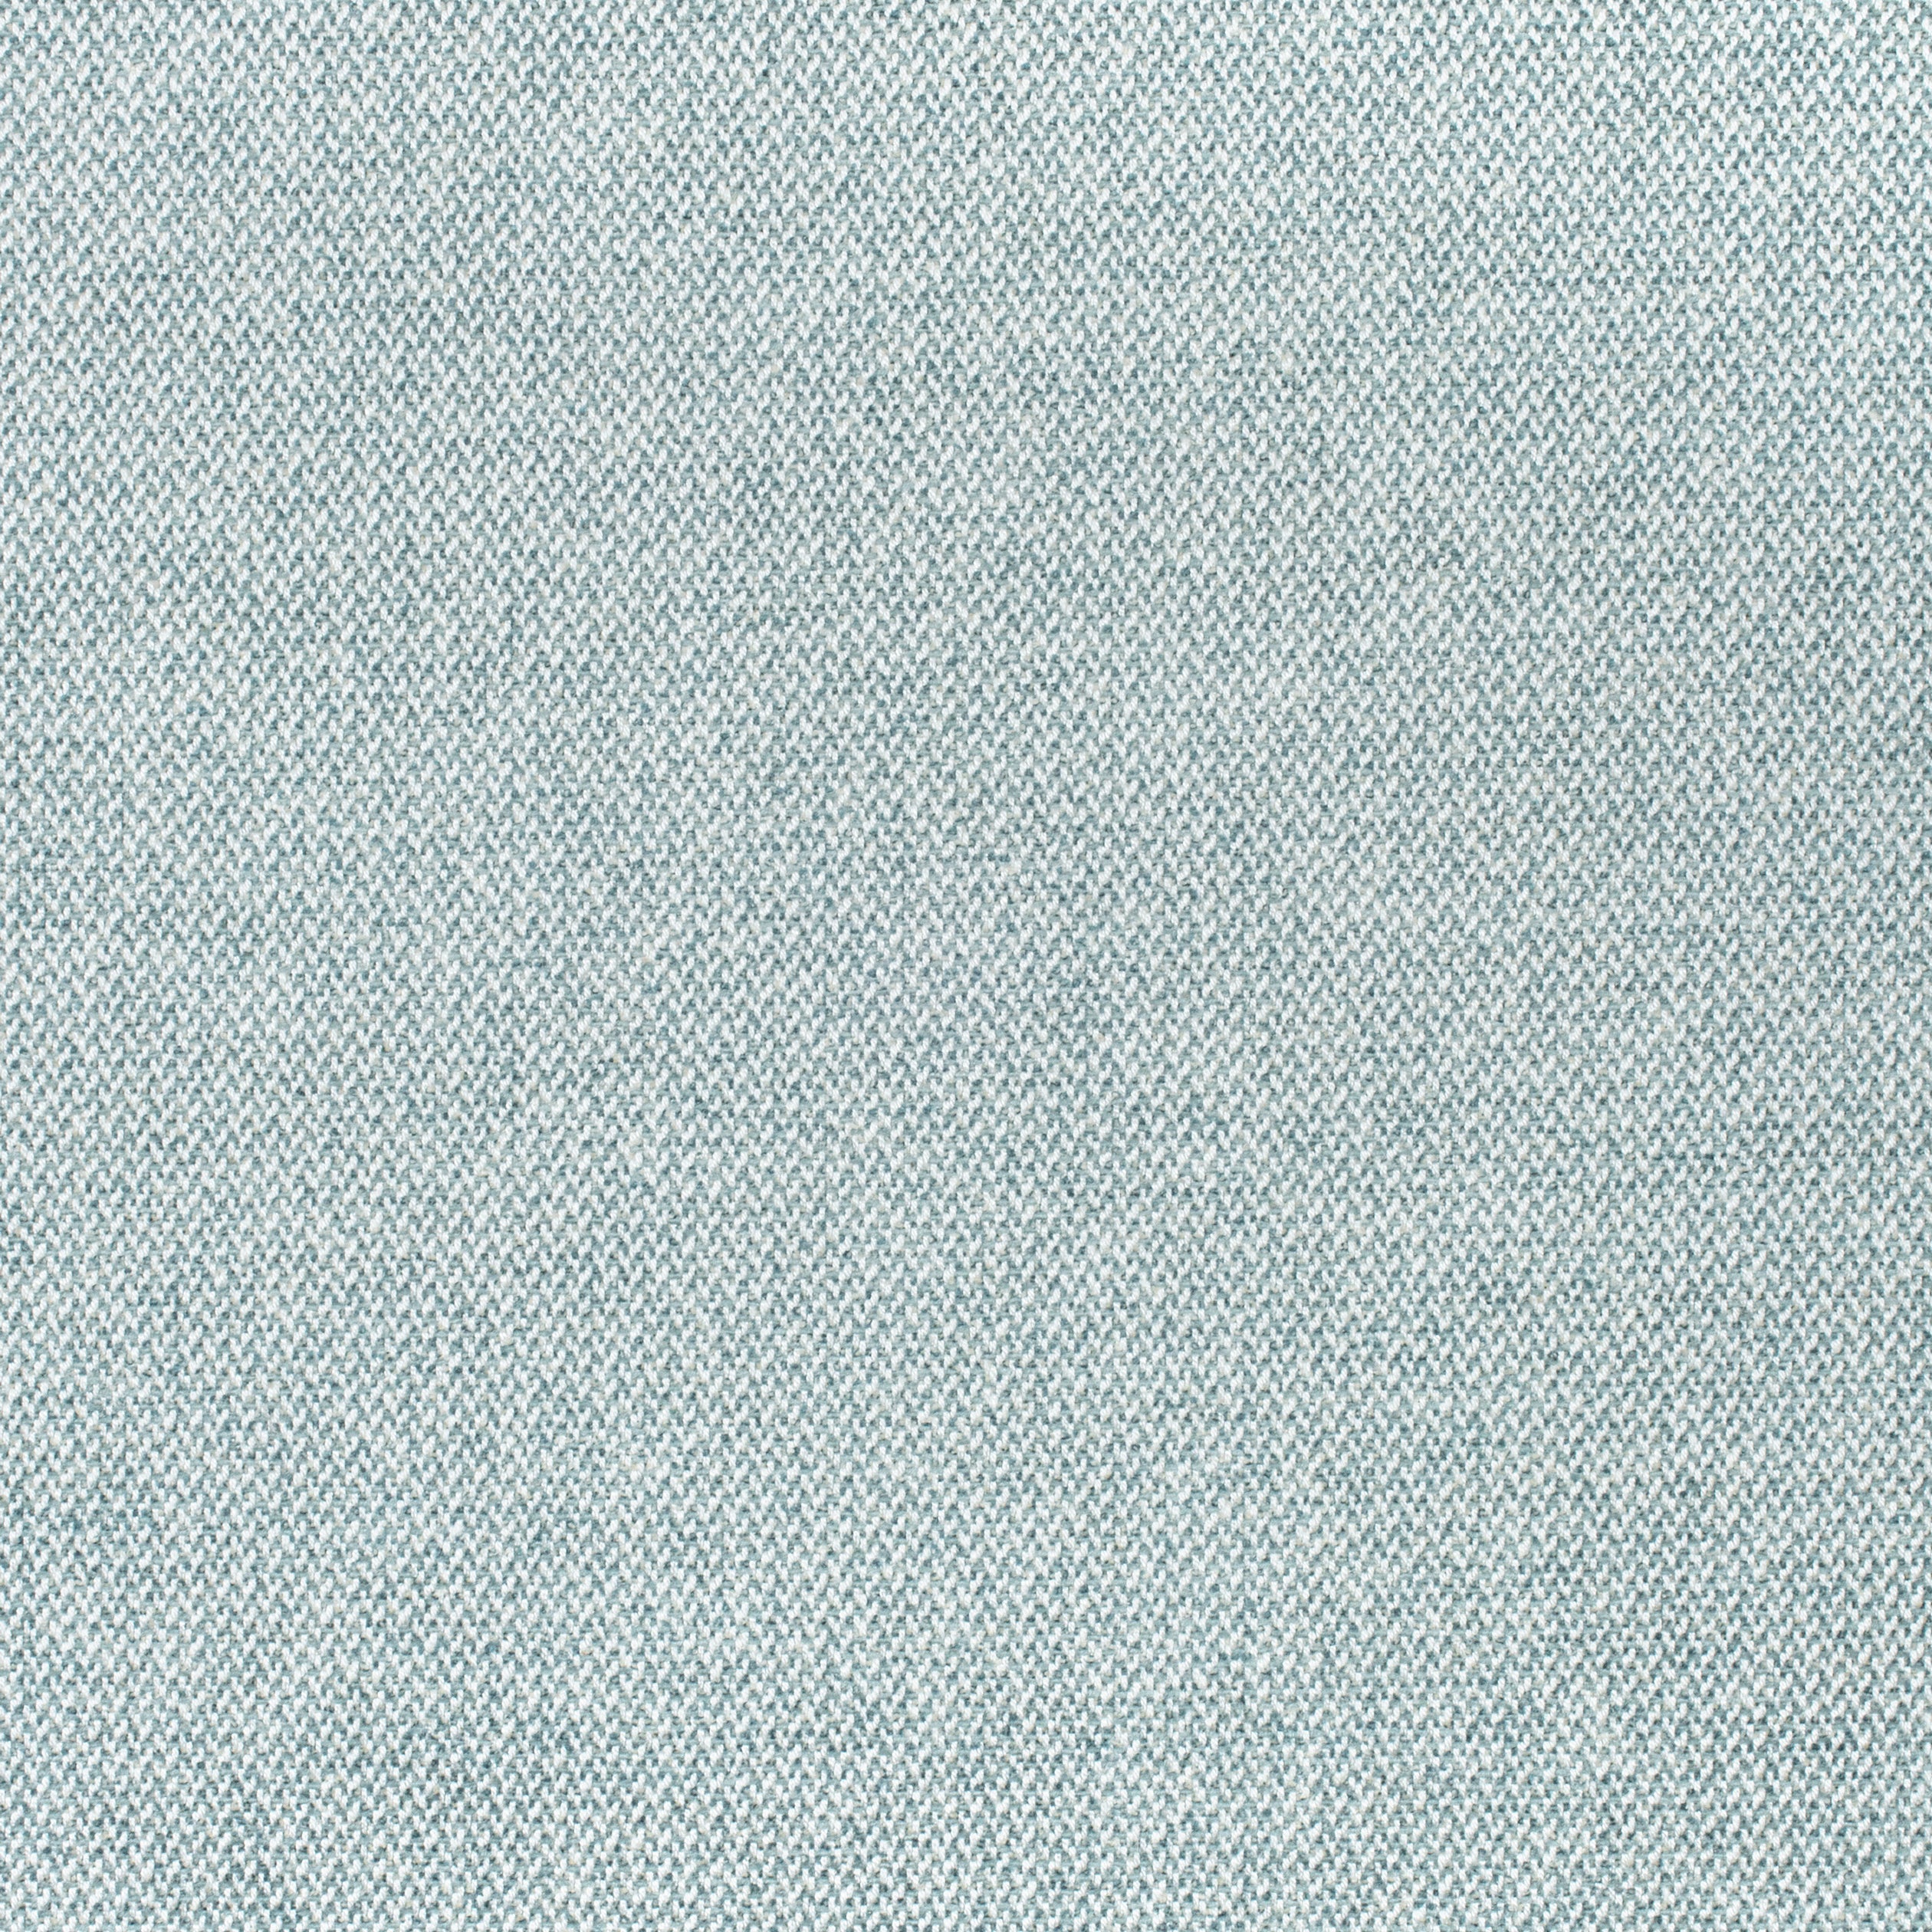 Picco fabric in aqua color - pattern number W80706 - by Thibaut in the Woven Resource 11: Rialto collection